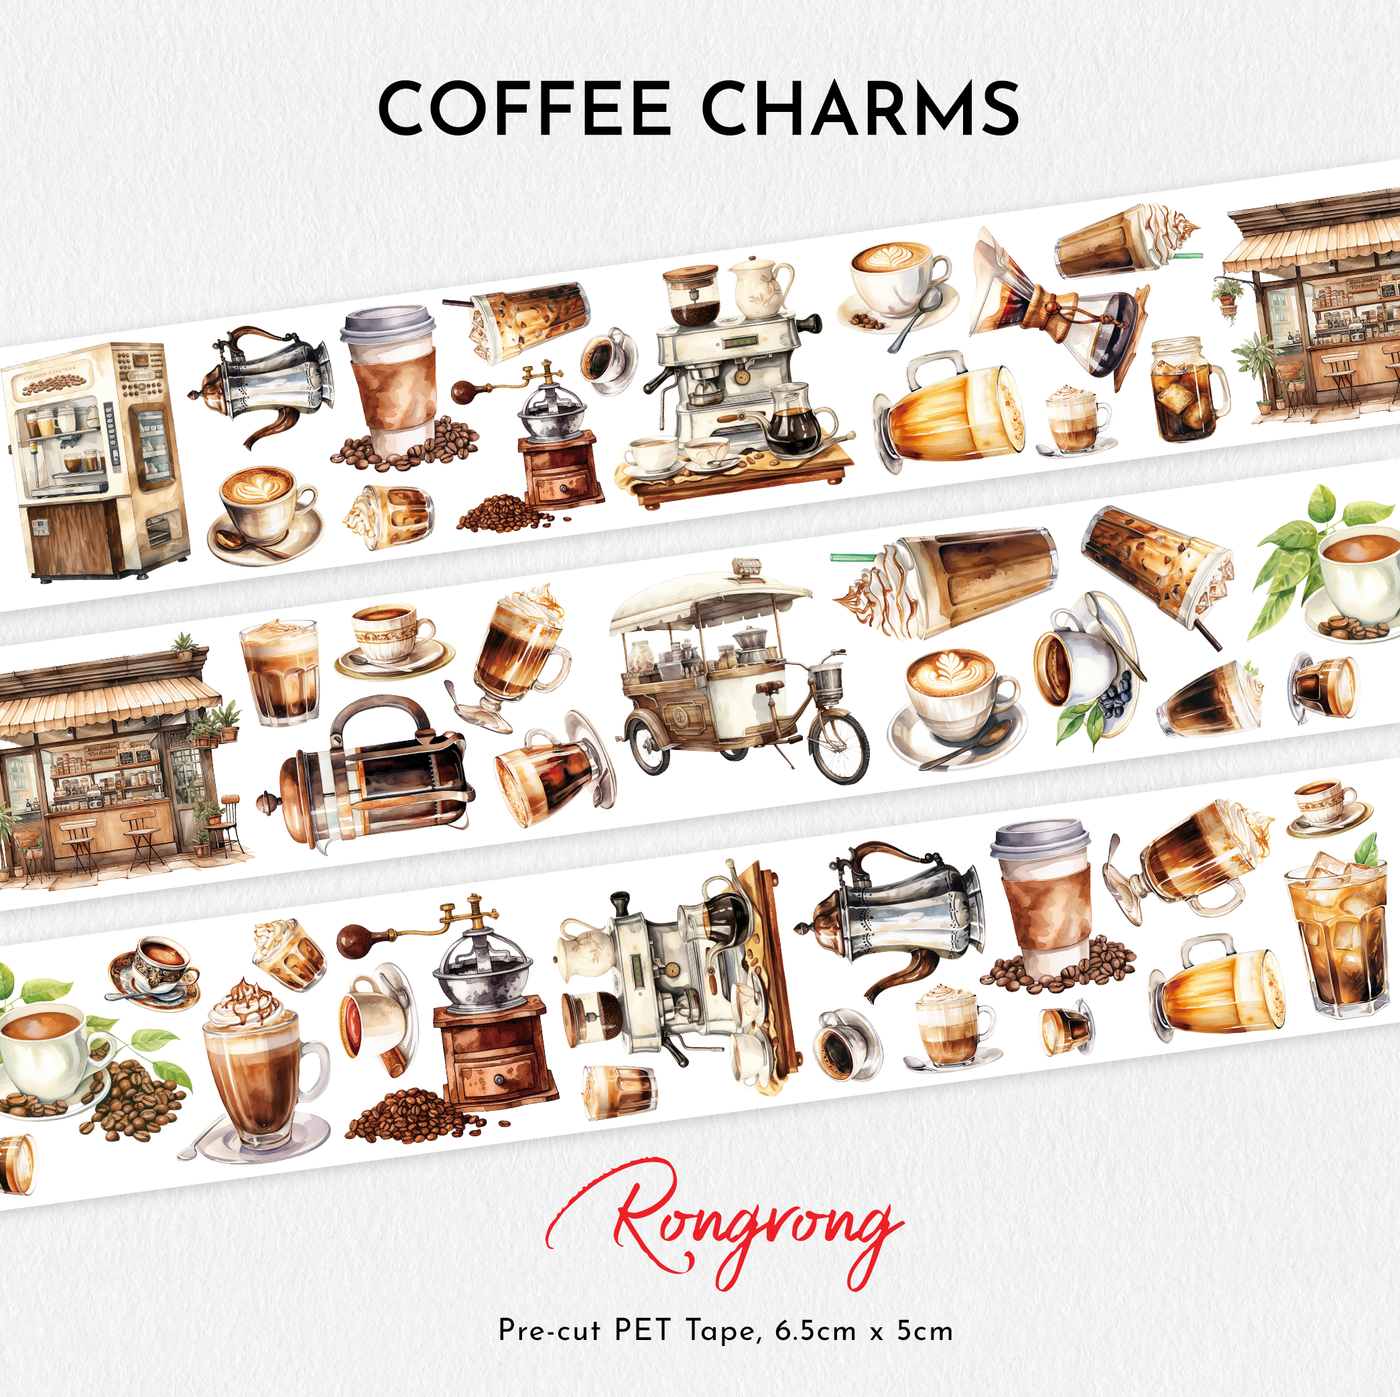 Shop Rongrong Coffee Charms PET Tape